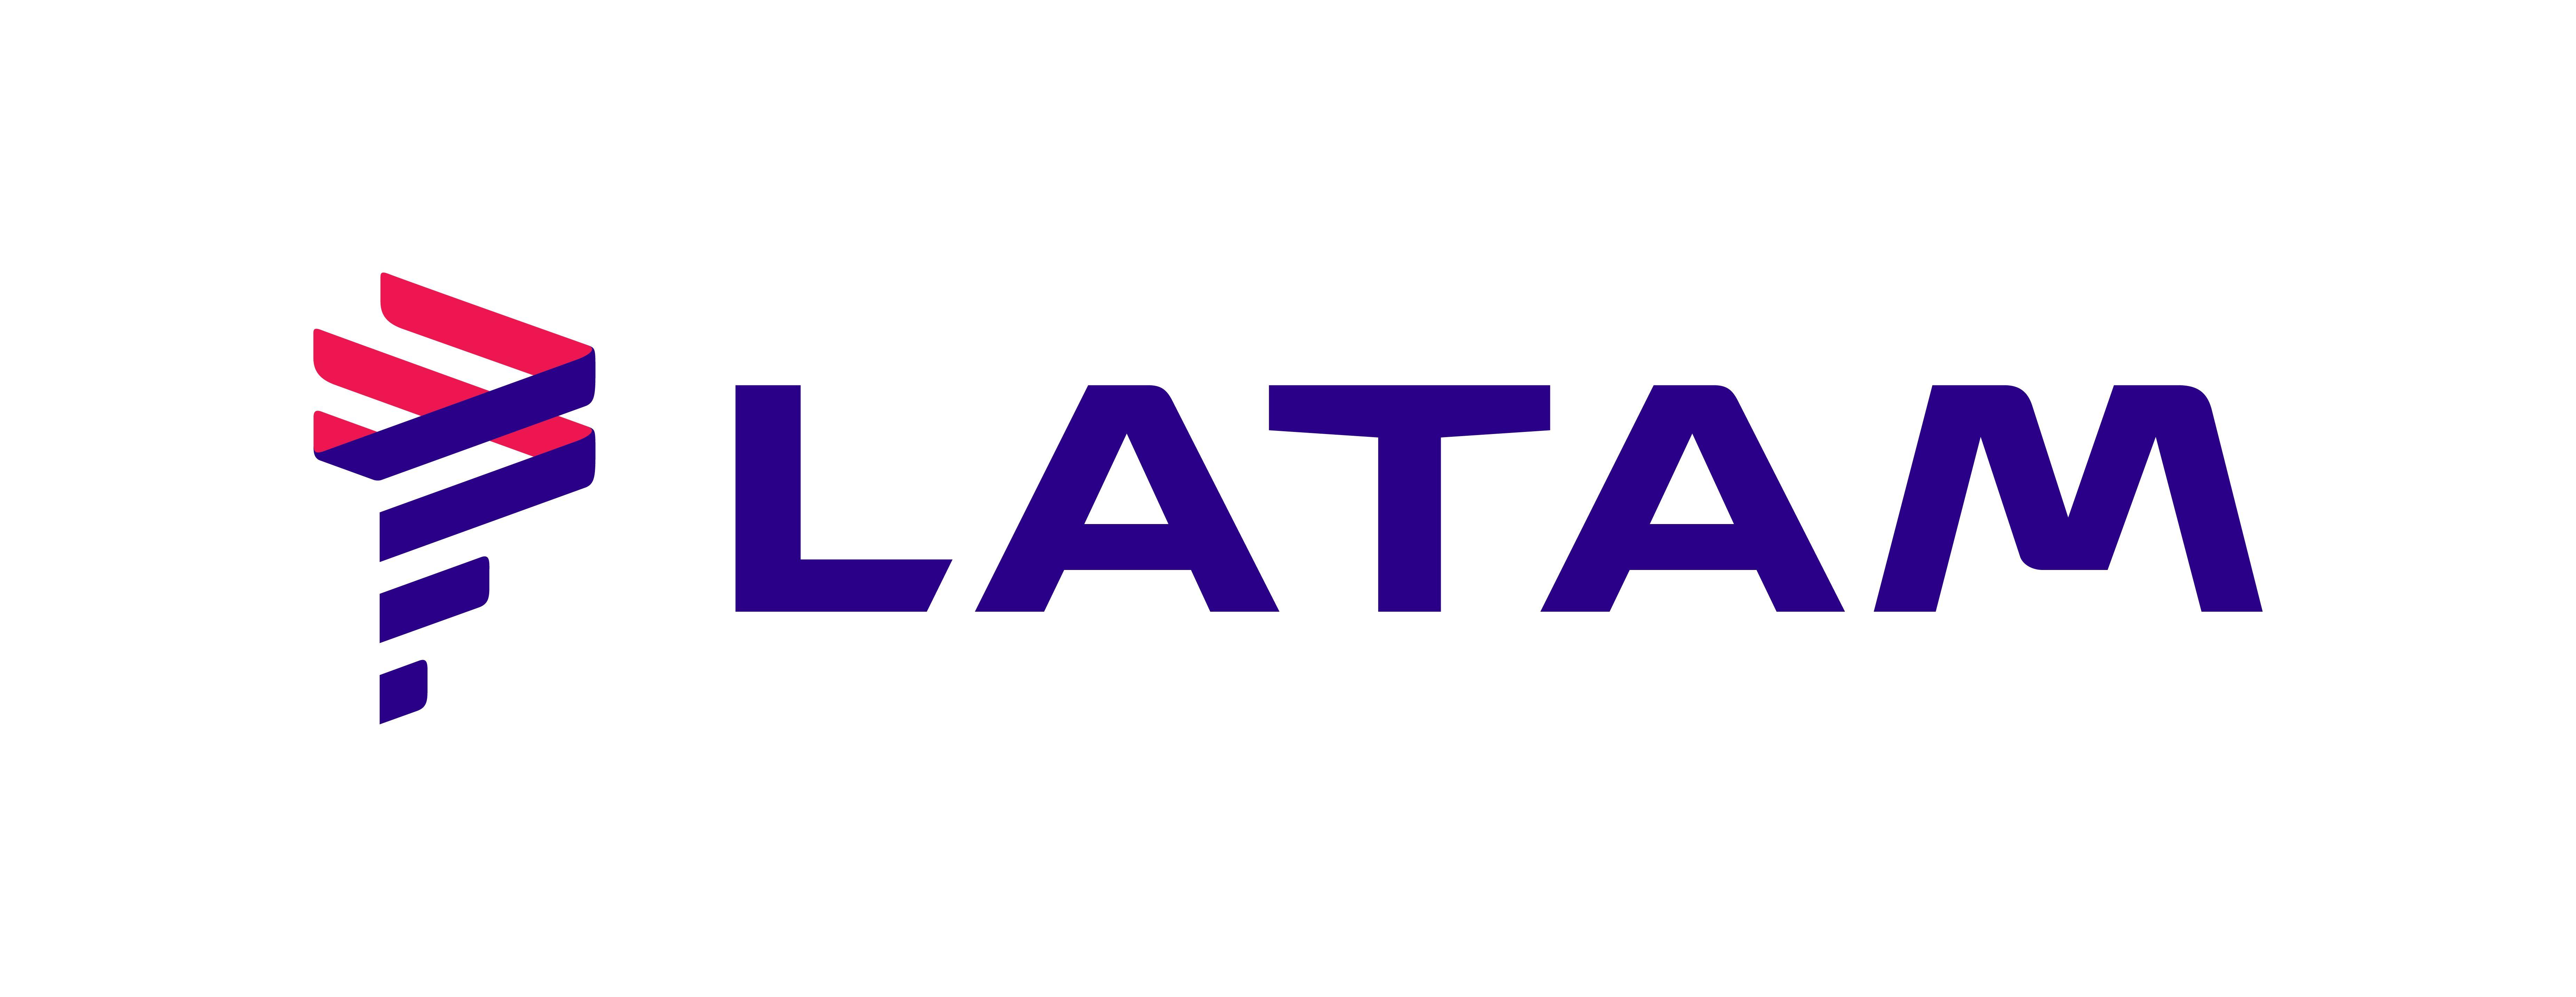 Leading Airline Logo - LATAM Airlines Group is recognized as the leading airline in the ...